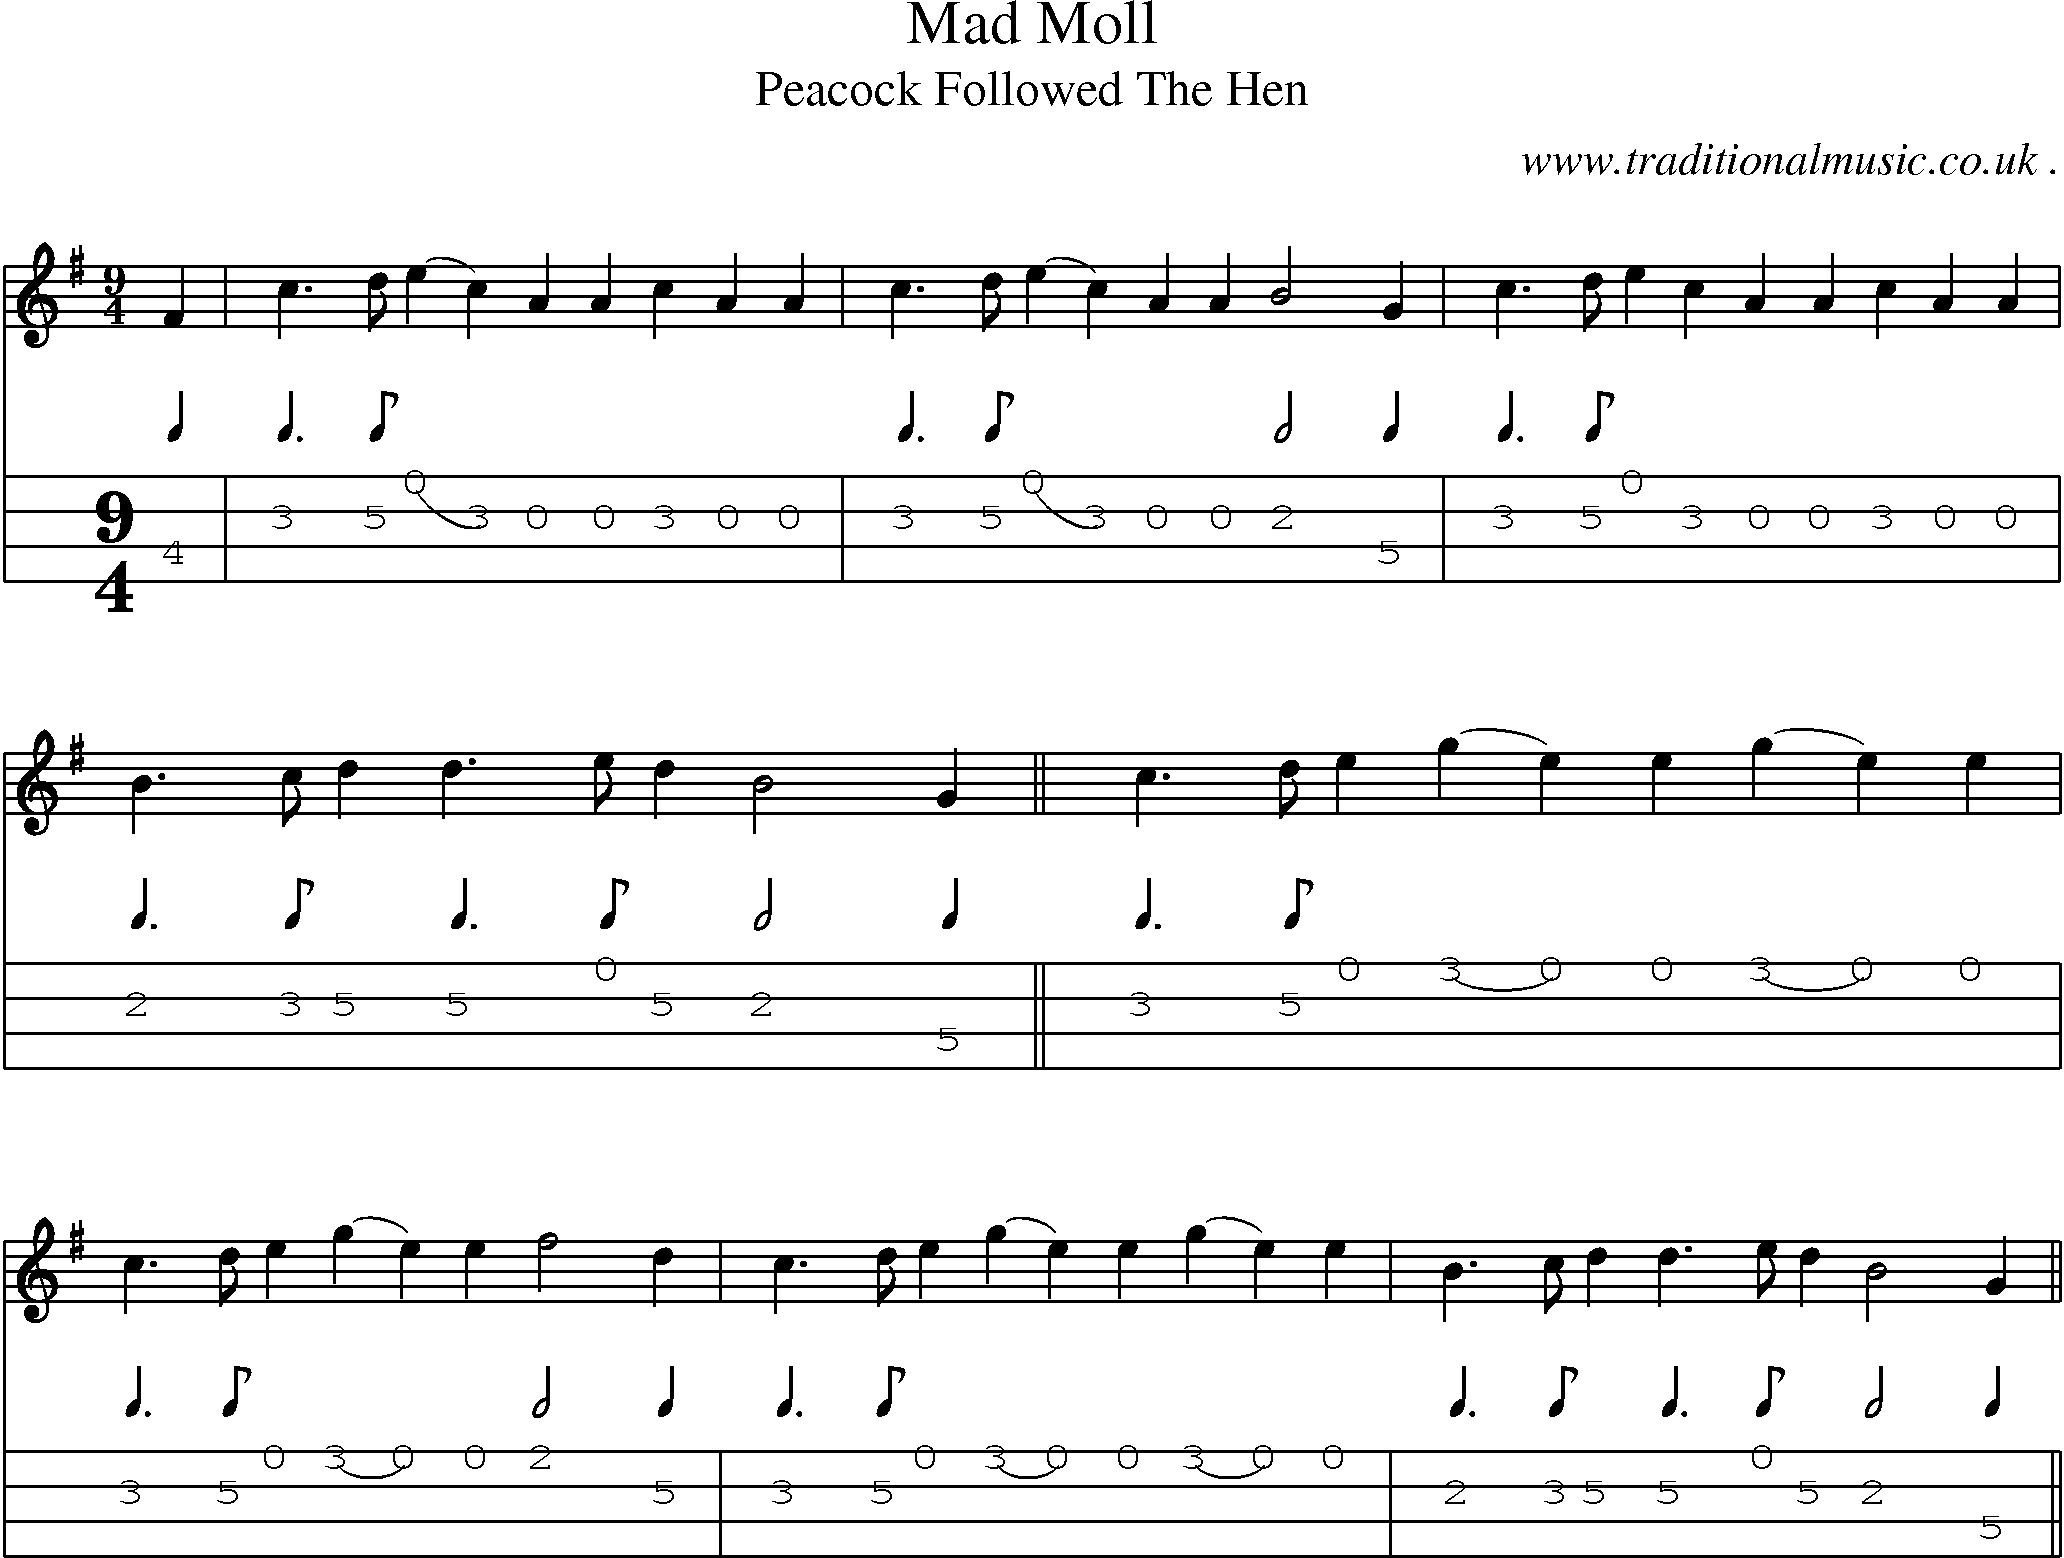 Sheet-Music and Mandolin Tabs for Mad Moll